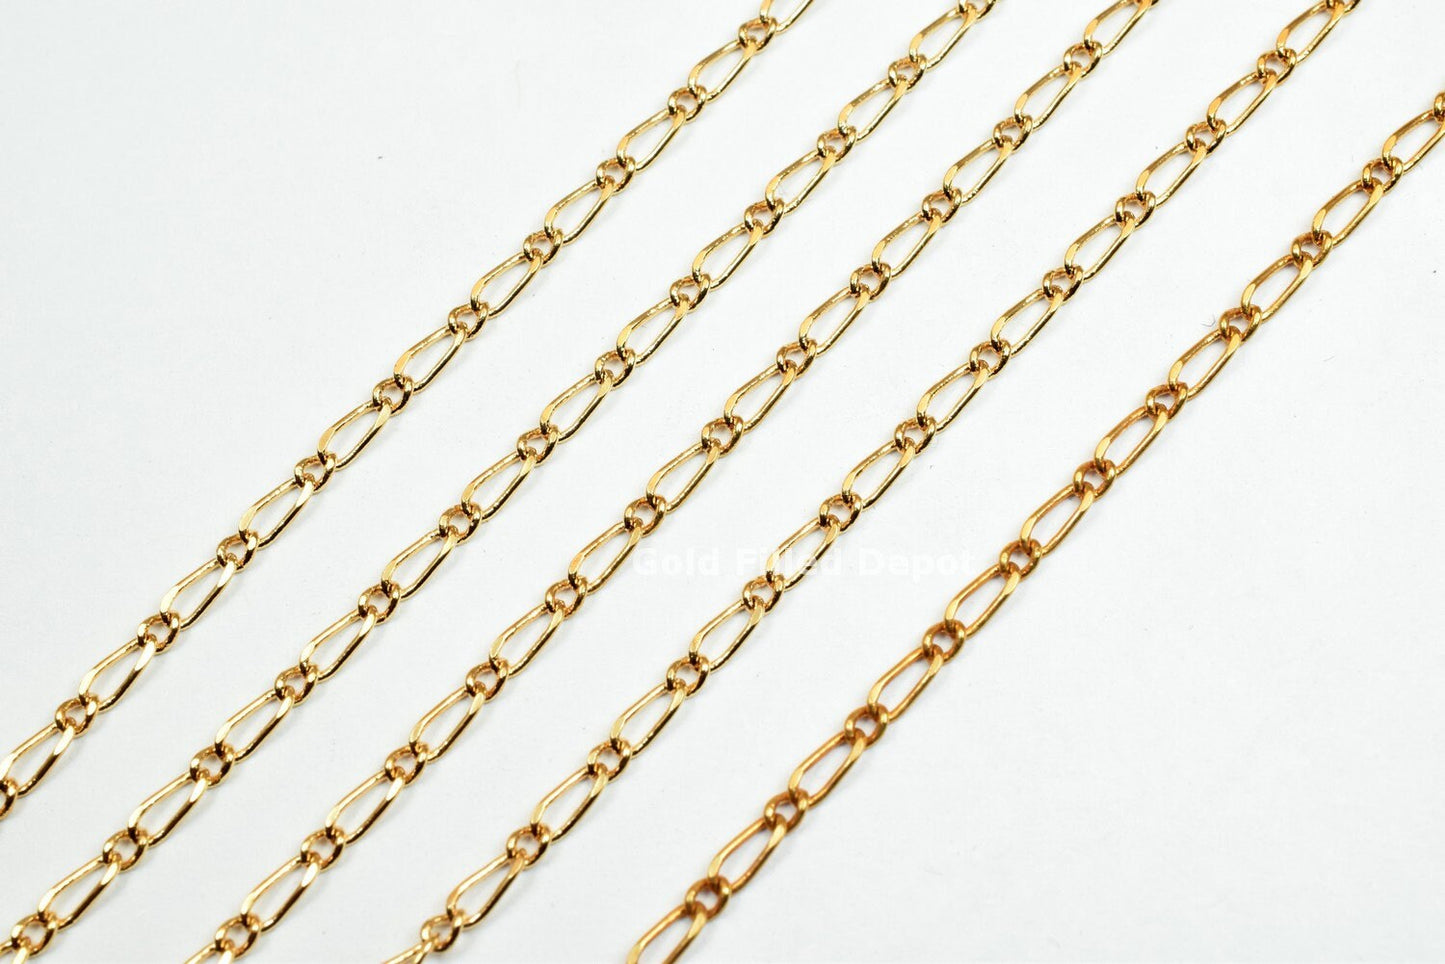 3 Foots 18K Gold Filled Chain Cable Link Chain Width 2mm Thickness 0.5mm Gold-Filled finding for Gold Filled Jewelry Making GFC013